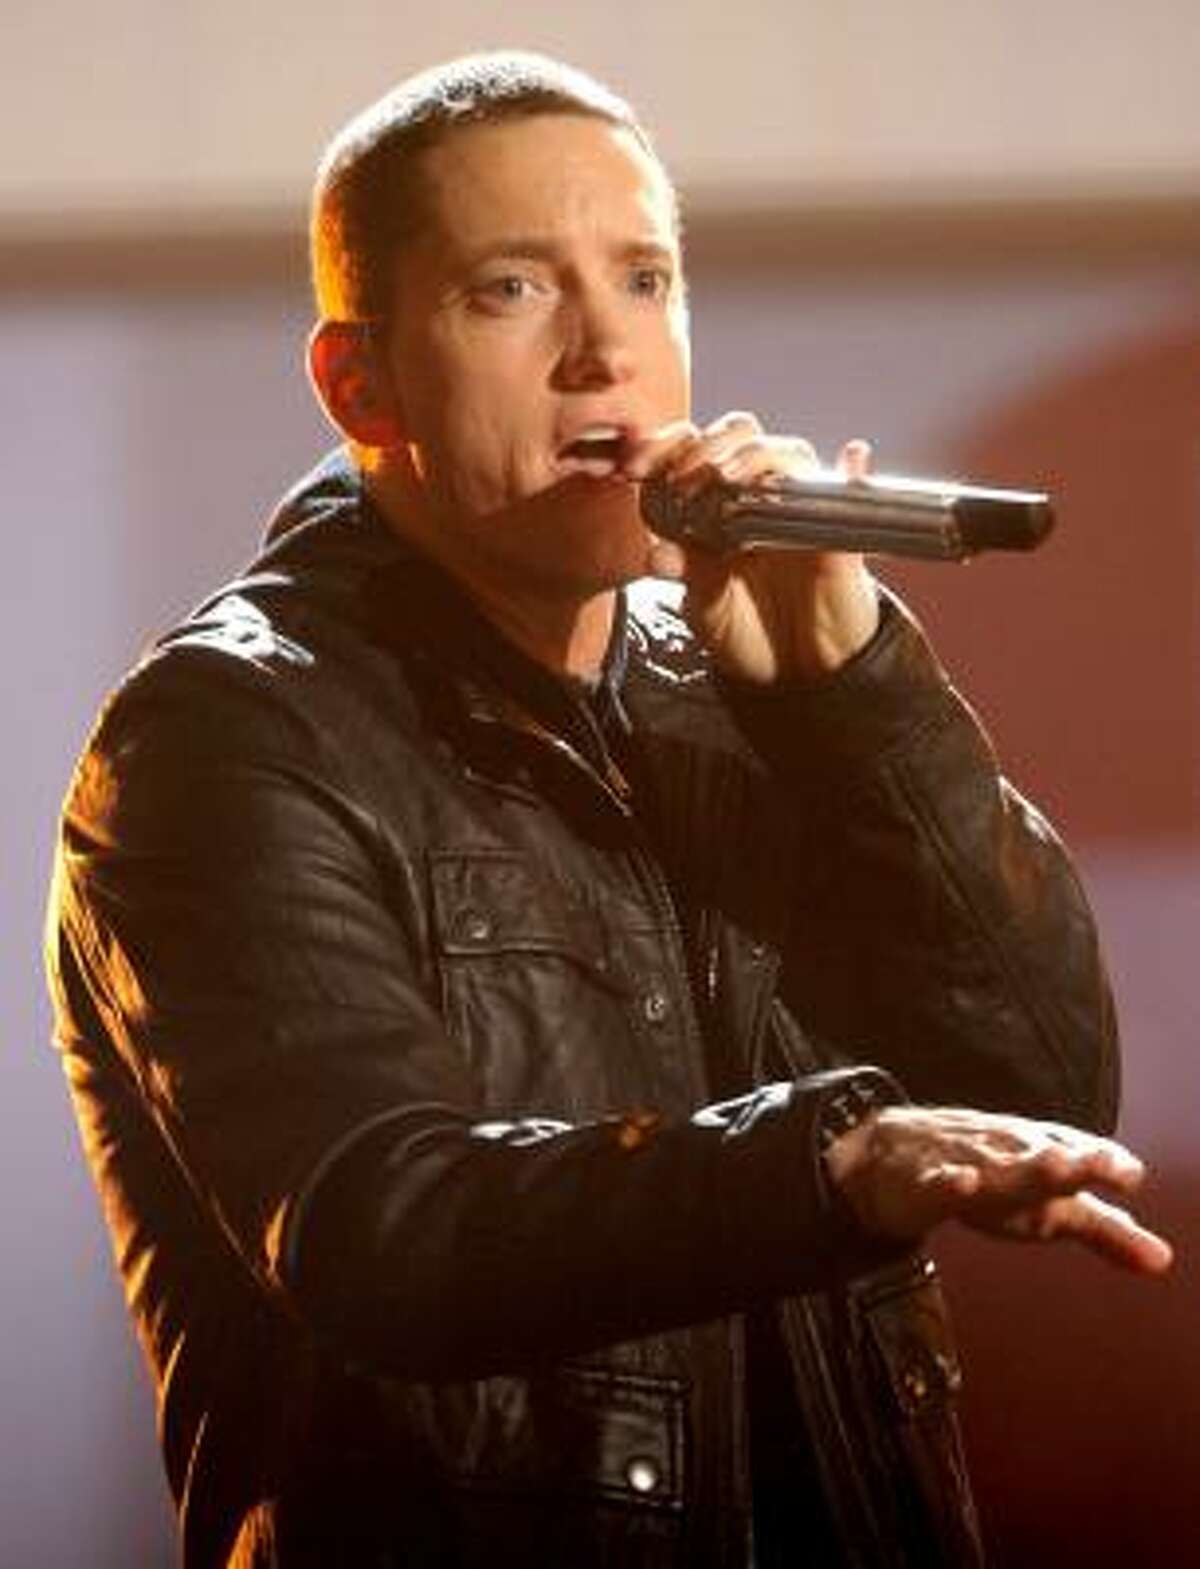 Rapper Eminem led the pack with 10 nominations, including Album of the Year.